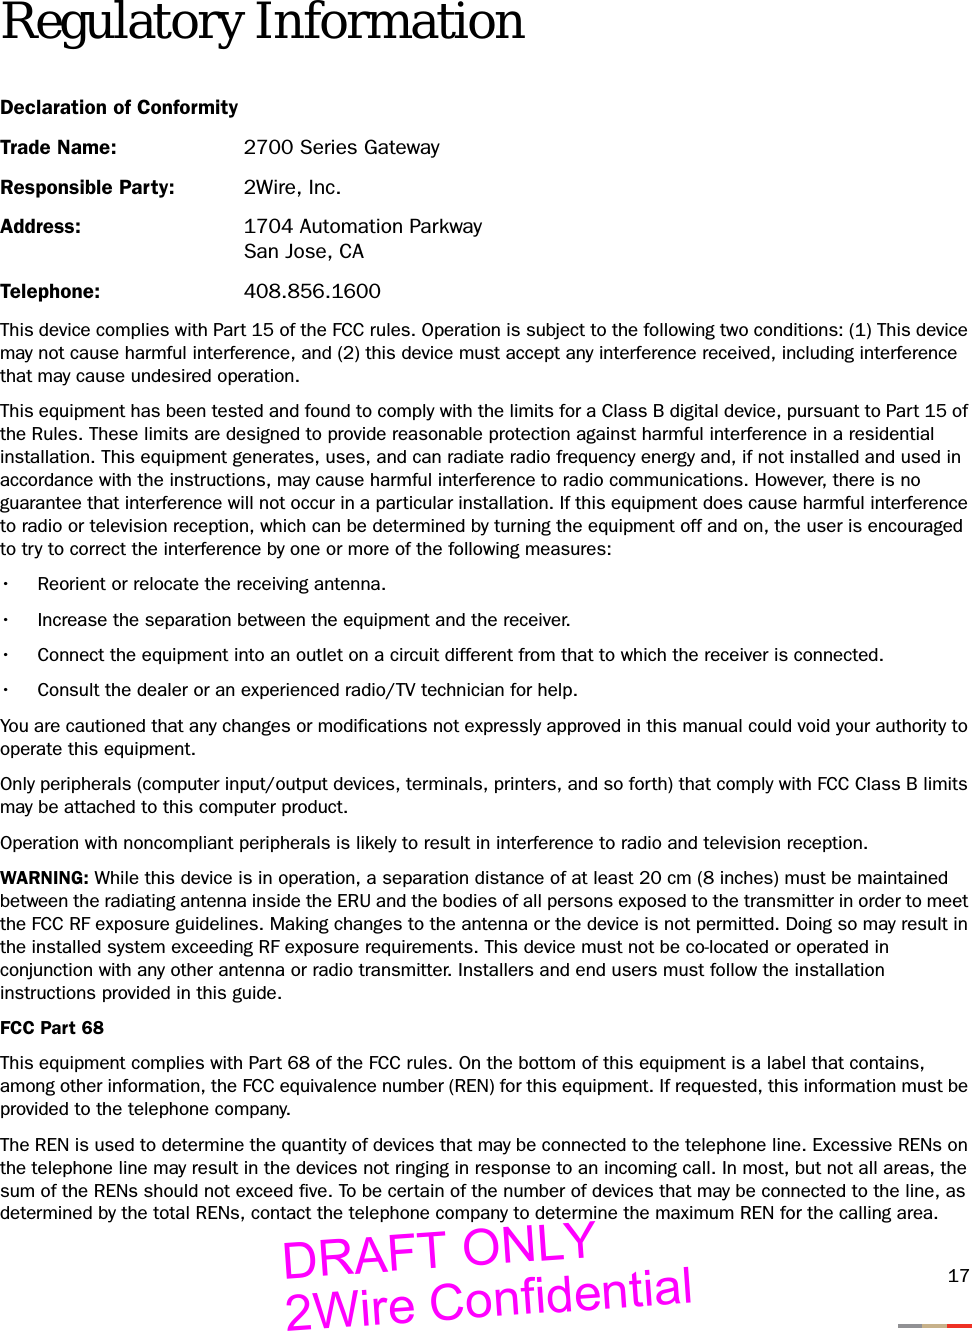 17Regulatory InformationDeclaration of ConformityTrade Name:  2700 Series GatewayResponsible Party:  2Wire, Inc.Address: 1704 Automation ParkwaySan Jose, CATelephone: 408.856.1600This device complies with Part 15 of the FCC rules. Operation is subject to the following two conditions: (1) This device may not cause harmful interference, and (2) this device must accept any interference received, including interference that may cause undesired operation.This equipment has been tested and found to comply with the limits for a Class B digital device, pursuant to Part 15 of the Rules. These limits are designed to provide reasonable protection against harmful interference in a residential installation. This equipment generates, uses, and can radiate radio frequency energy and, if not installed and used in accordance with the instructions, may cause harmful interference to radio communications. However, there is no guarantee that interference will not occur in a particular installation. If this equipment does cause harmful interference to radio or television reception, which can be determined by turning the equipment off and on, the user is encouraged to try to correct the interference by one or more of the following measures:• Reorient or relocate the receiving antenna.• Increase the separation between the equipment and the receiver.• Connect the equipment into an outlet on a circuit different from that to which the receiver is connected.• Consult the dealer or an experienced radio/TV technician for help.You are cautioned that any changes or modifications not expressly approved in this manual could void your authority to operate this equipment.Only peripherals (computer input/output devices, terminals, printers, and so forth) that comply with FCC Class B limits may be attached to this computer product. Operation with noncompliant peripherals is likely to result in interference to radio and television reception.WARNING: While this device is in operation, a separation distance of at least 20 cm (8 inches) must be maintained between the radiating antenna inside the ERU and the bodies of all persons exposed to the transmitter in order to meet the FCC RF exposure guidelines. Making changes to the antenna or the device is not permitted. Doing so may result in the installed system exceeding RF exposure requirements. This device must not be co-located or operated in conjunction with any other antenna or radio transmitter. Installers and end users must follow the installation instructions provided in this guide.FCC Part 68This equipment complies with Part 68 of the FCC rules. On the bottom of this equipment is a label that contains, among other information, the FCC equivalence number (REN) for this equipment. If requested, this information must be provided to the telephone company.The REN is used to determine the quantity of devices that may be connected to the telephone line. Excessive RENs on the telephone line may result in the devices not ringing in response to an incoming call. In most, but not all areas, the sum of the RENs should not exceed five. To be certain of the number of devices that may be connected to the line, as determined by the total RENs, contact the telephone company to determine the maximum REN for the calling area. DRAFT ONLY2Wire Confidential